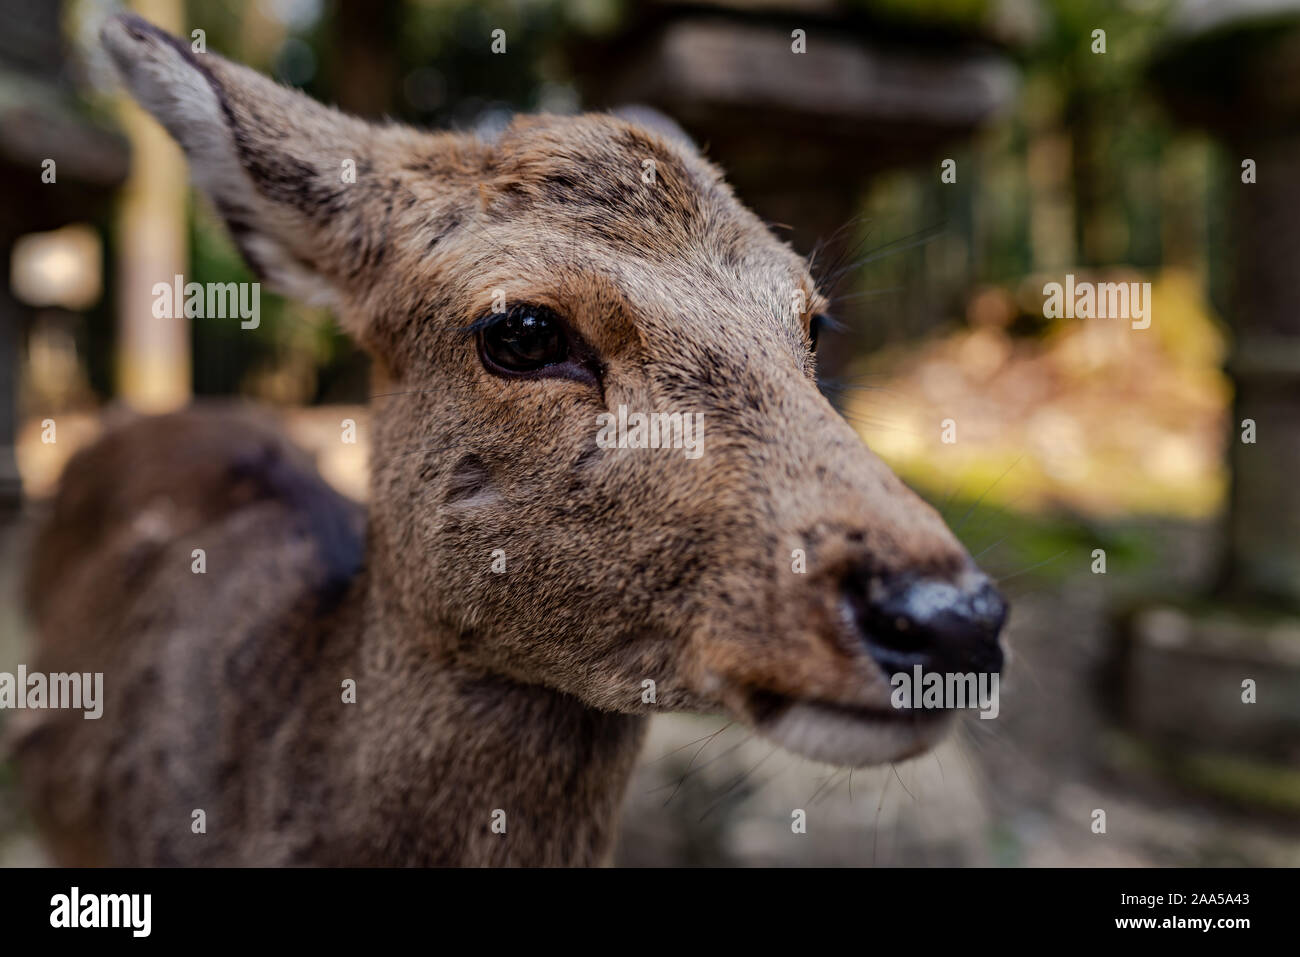 Close-up picture of a Sika deer taken in a sunny spring afternoon in Nara Park, Japan Stock Photo